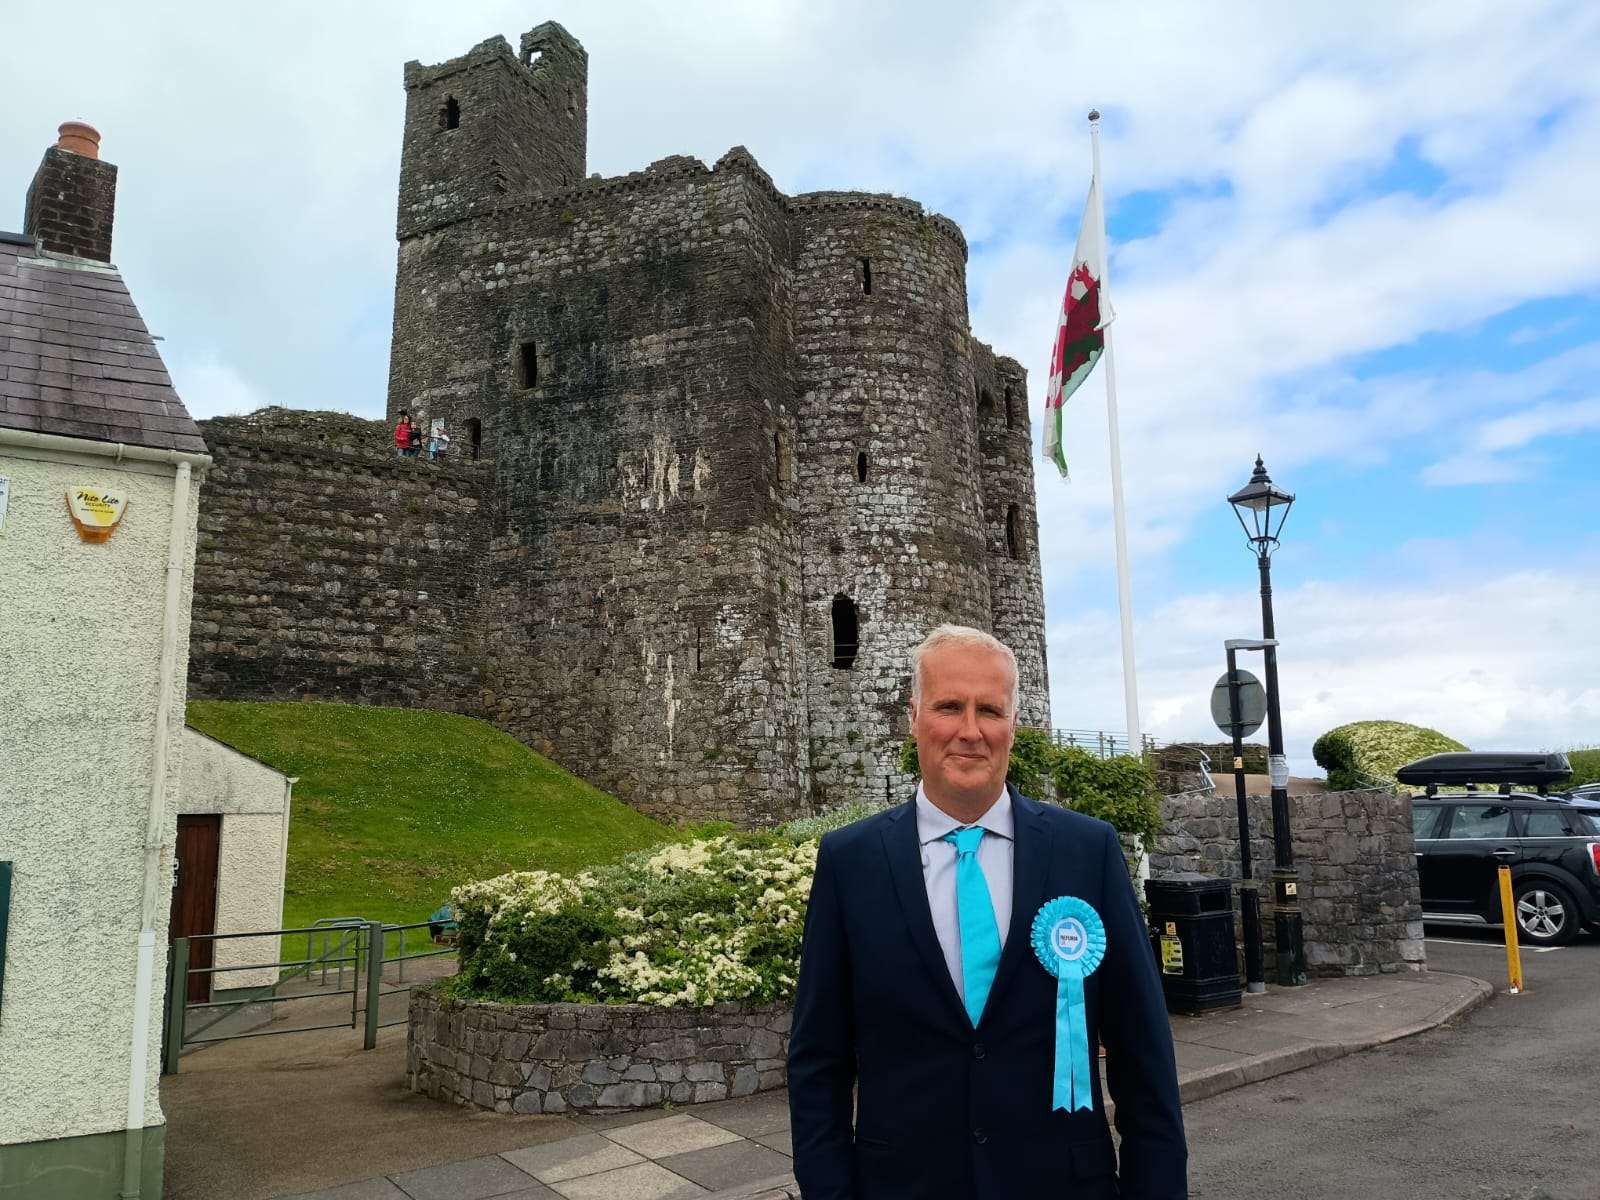 Reform UK announce Gareth Beer as candidate for Llanelli Constituency